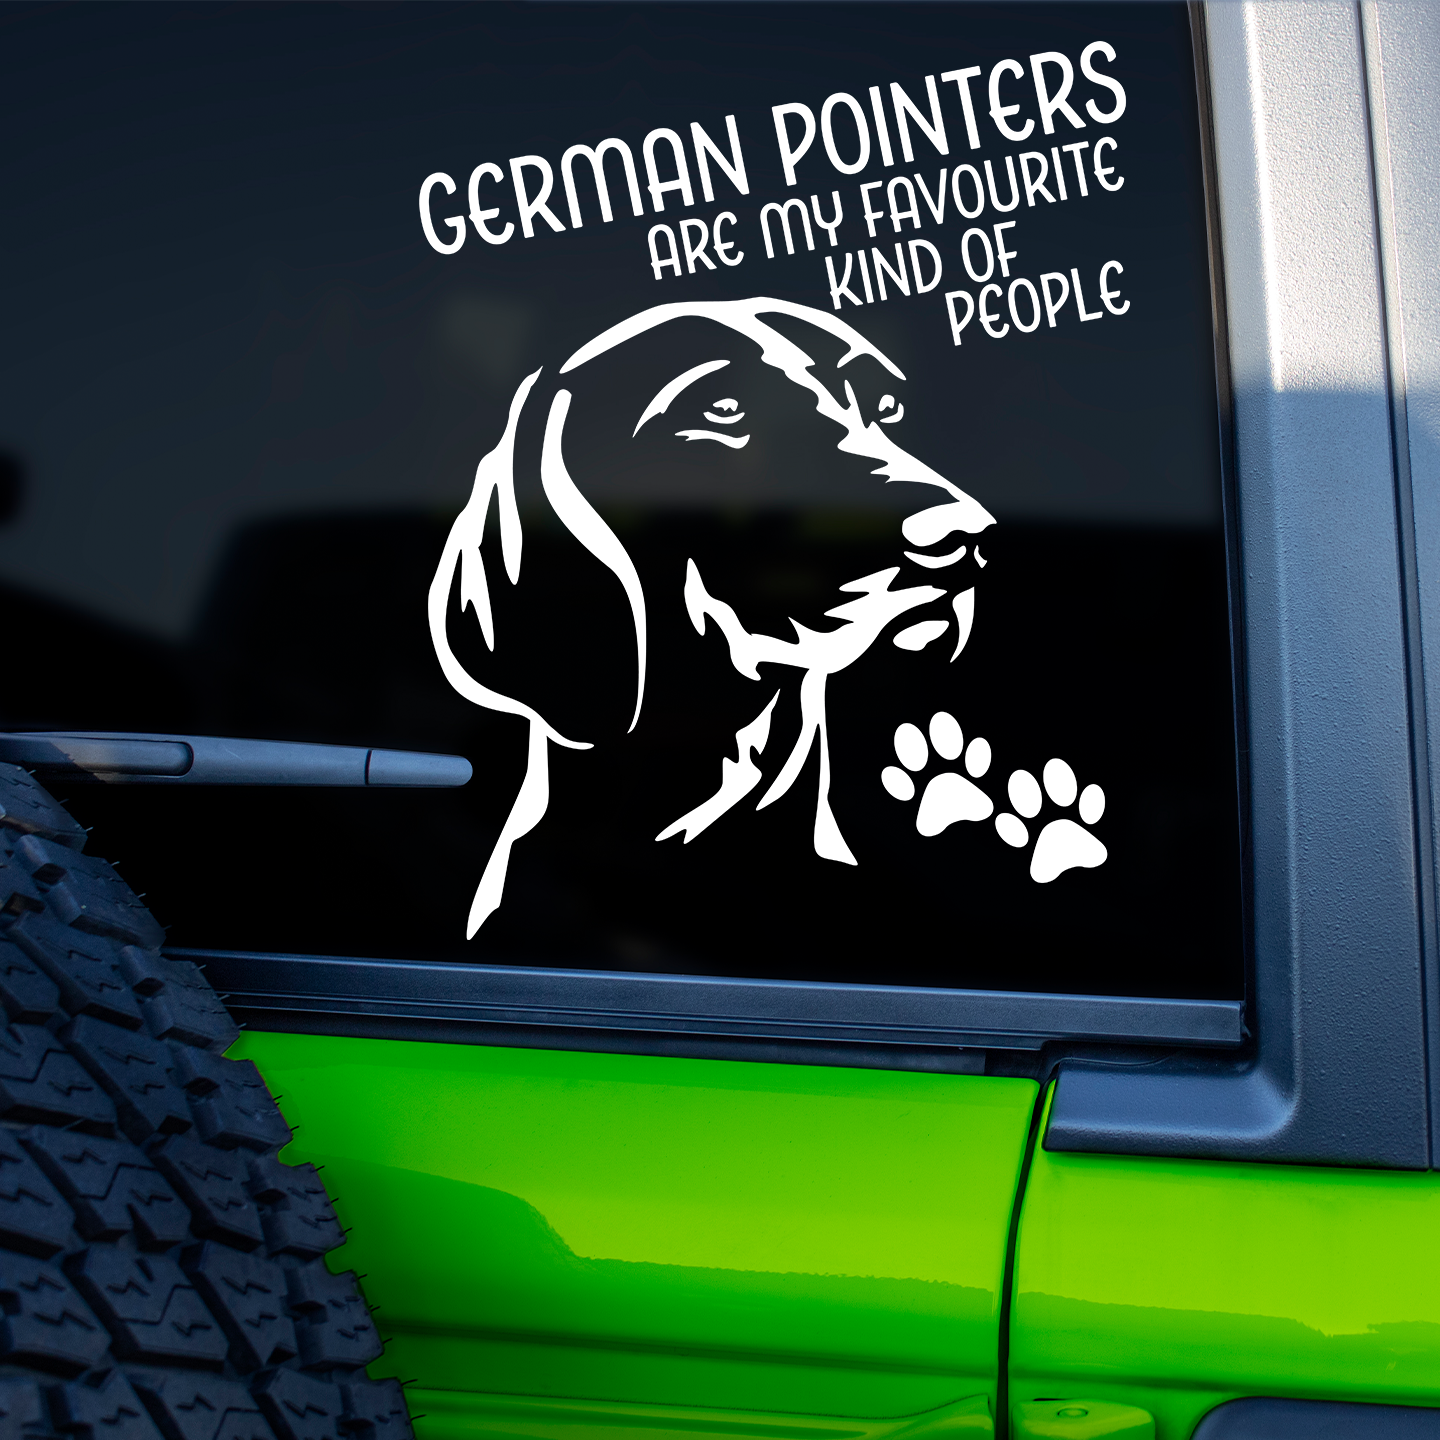 German Pointers Are My Favourite Kind Of People Sticker